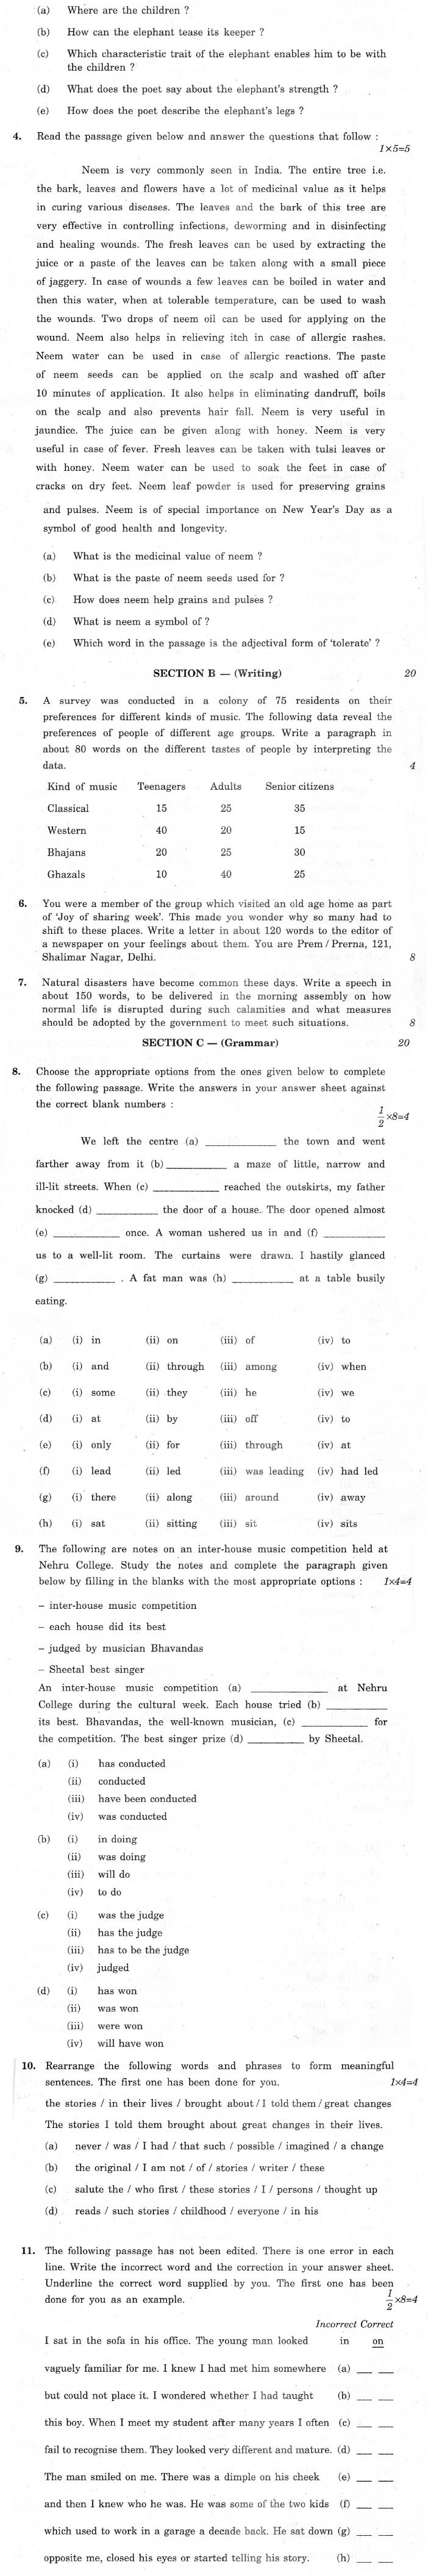 CBSE Class X Previous Year Question Papers 2012 English Communicative